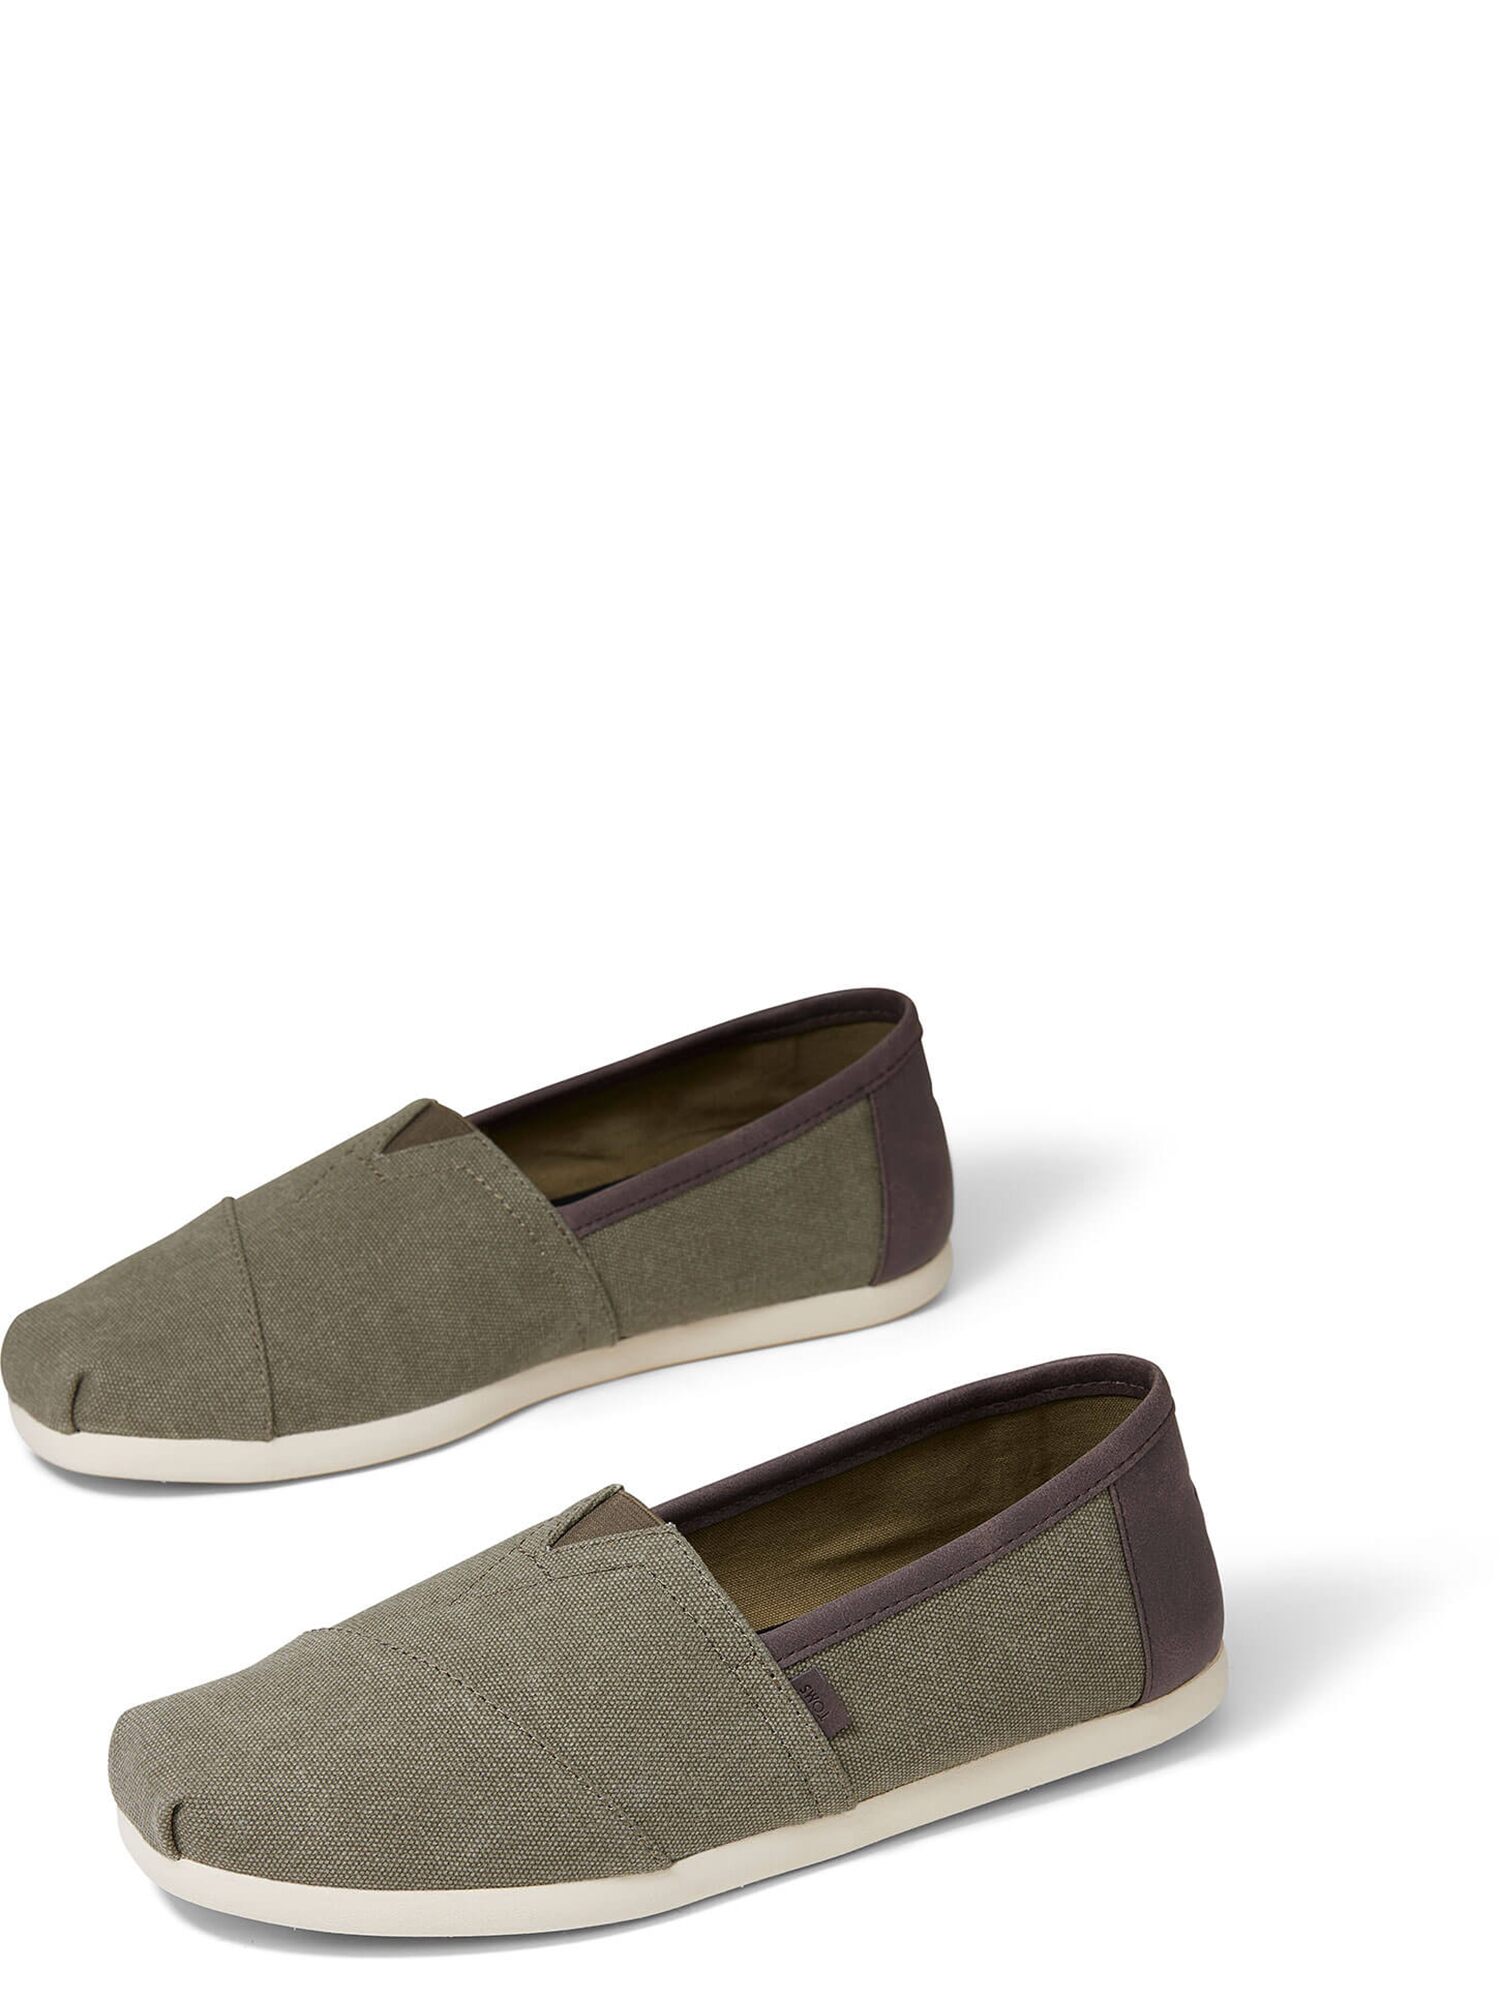 TOMS Men's Washed Canvas Classic Slip-On Shoes ft. Ortholite - image 2 of 3